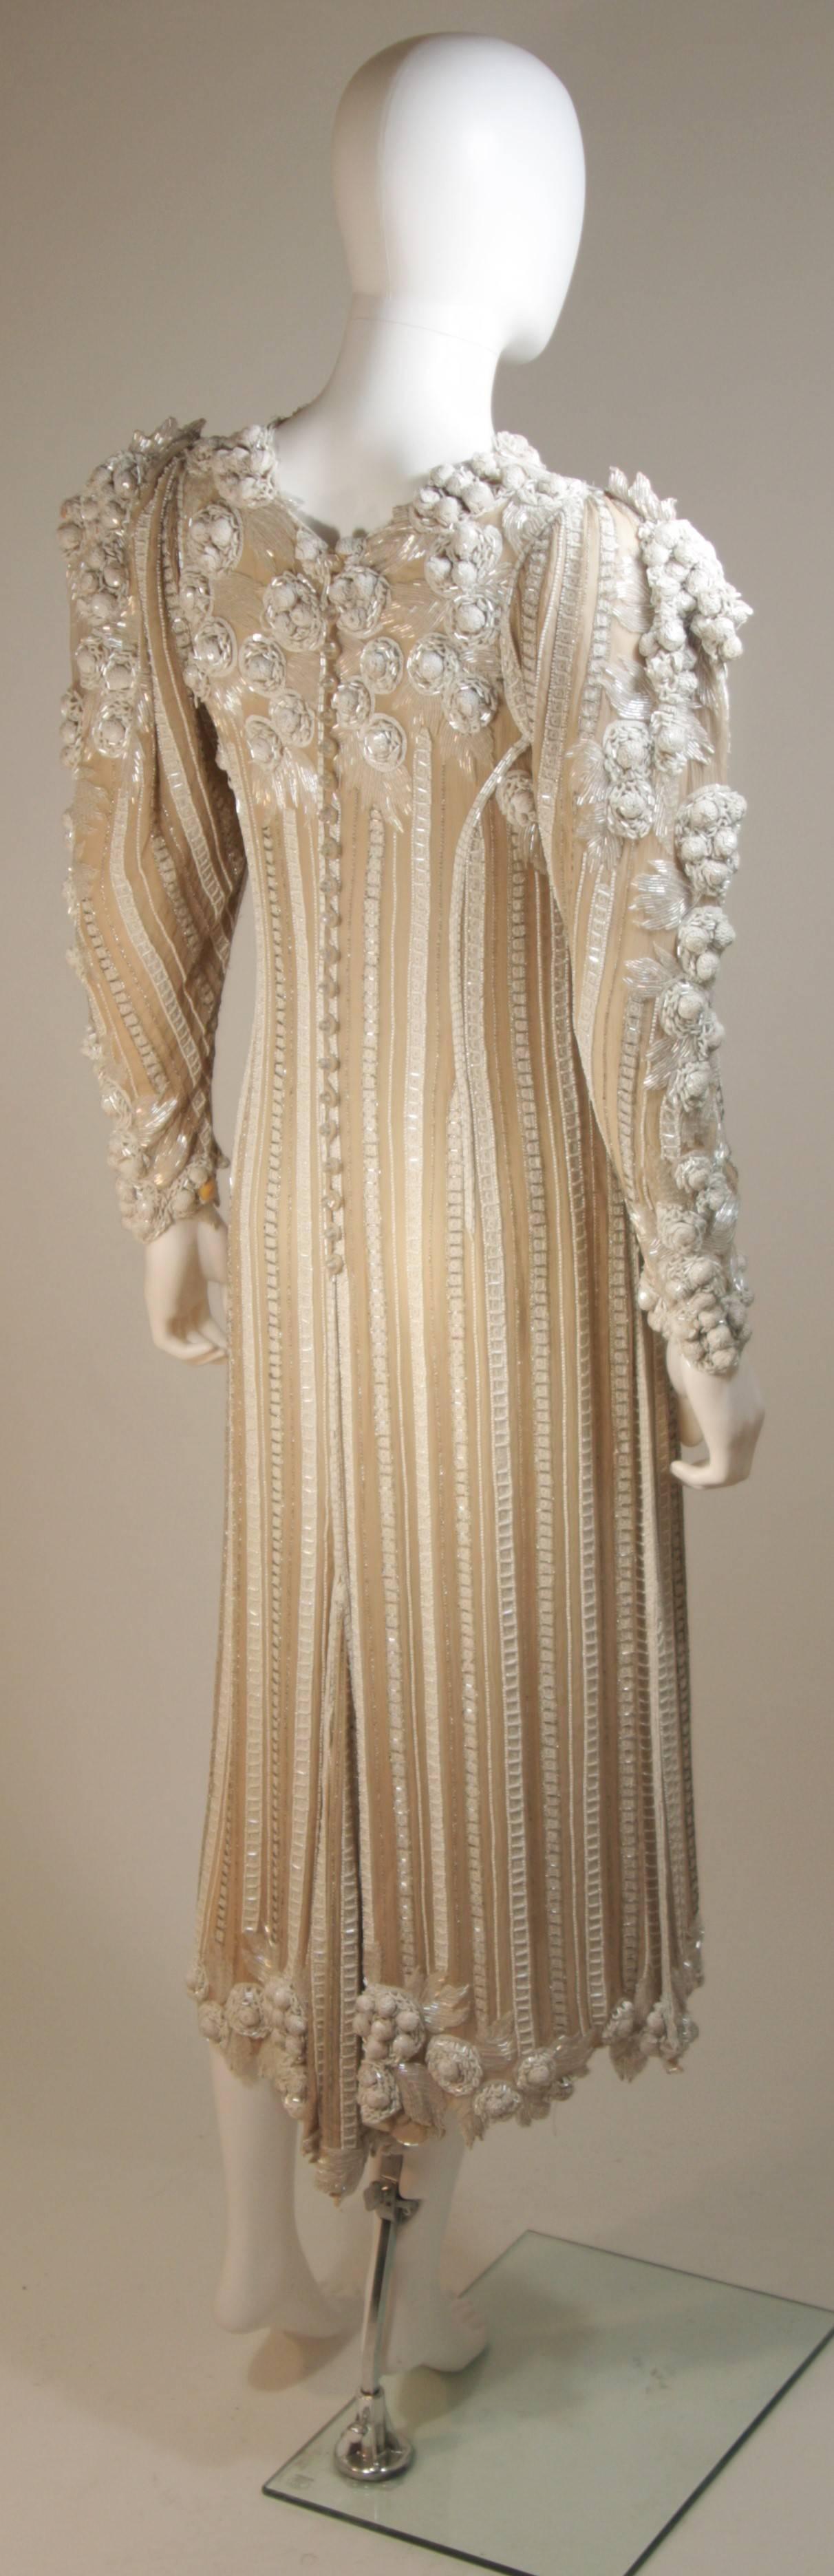 APROPOS 1980's Ivory Beaded Gown with Shoulder Accents Size 6-8 For Sale 1